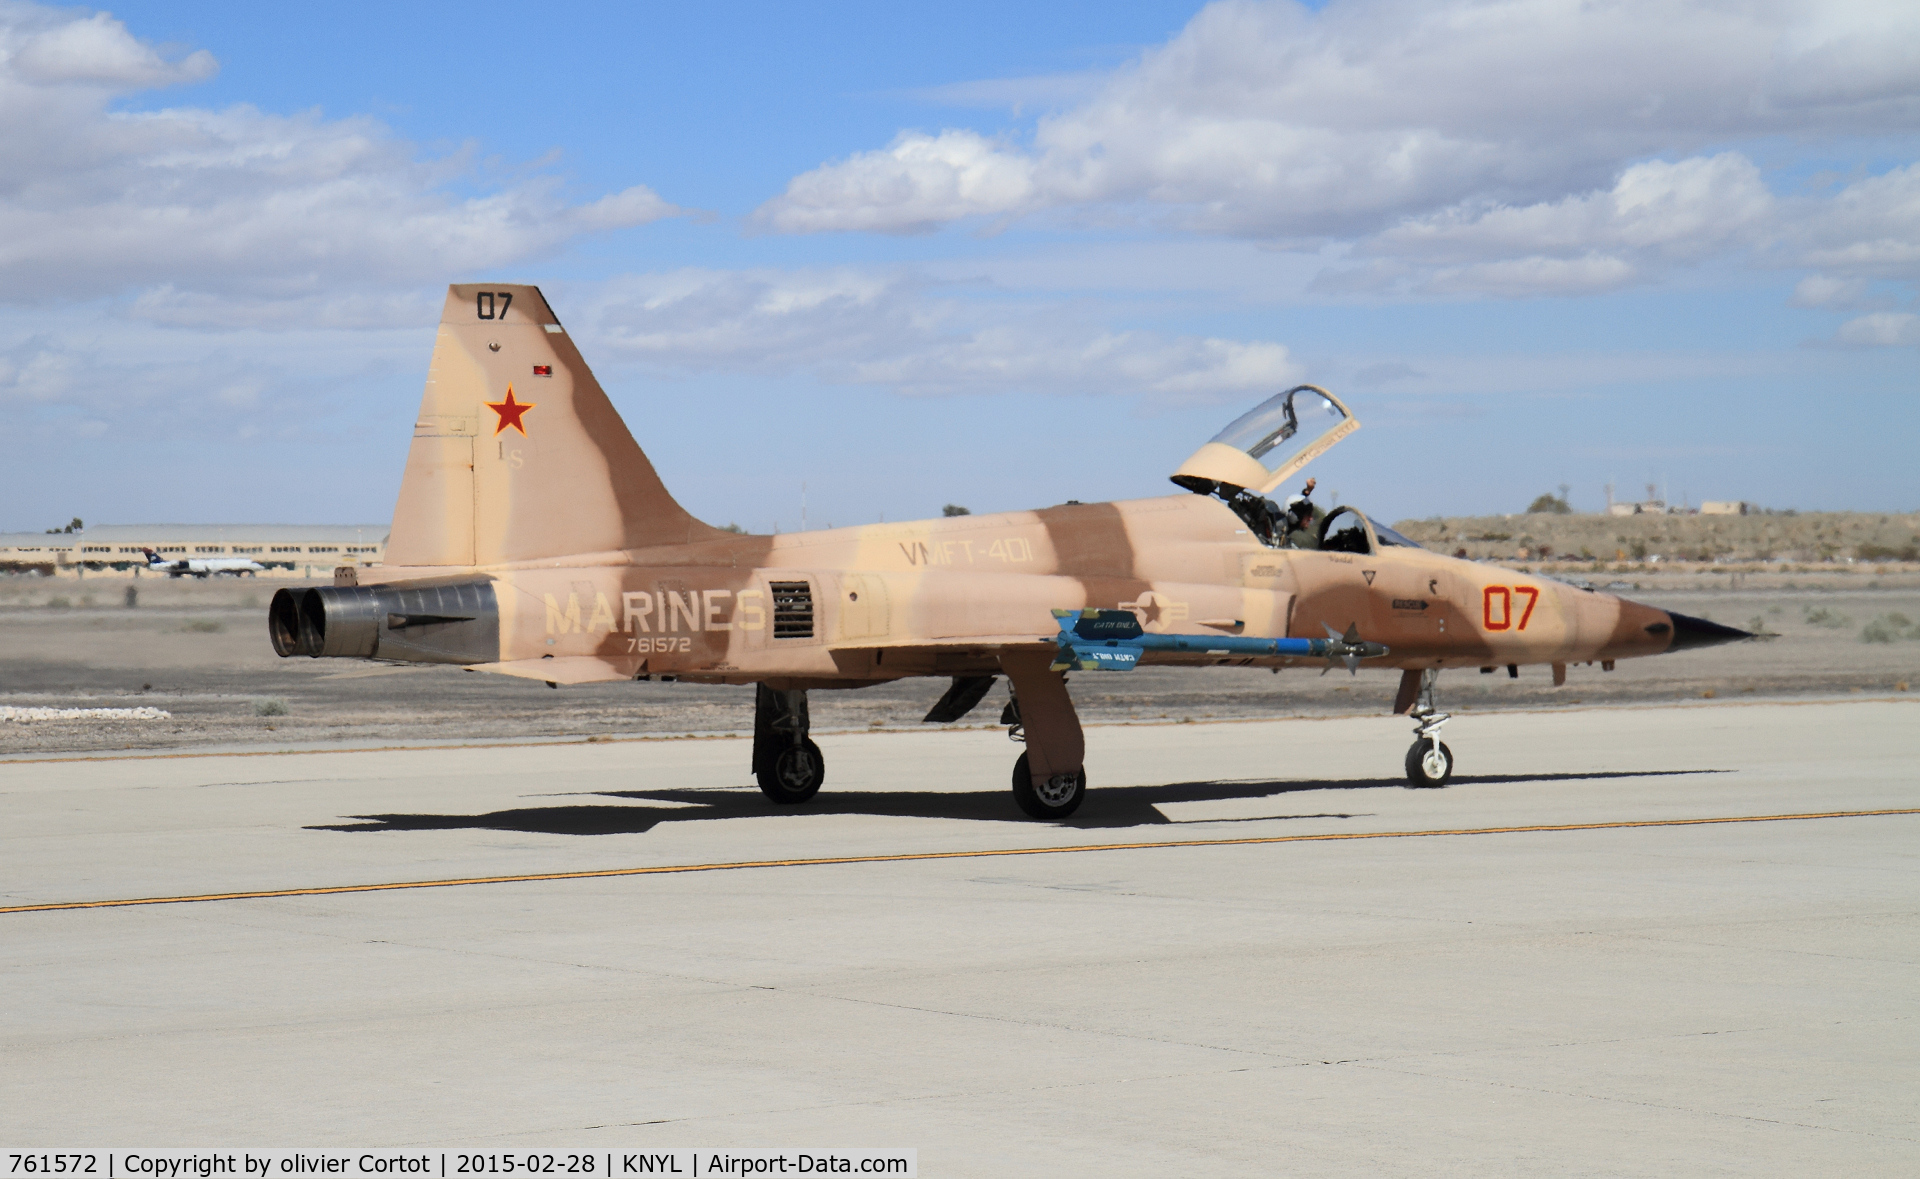 761572, Northrop F-5N Tiger II C/N L.1047, Yuma airshow, in the heat of another F-5